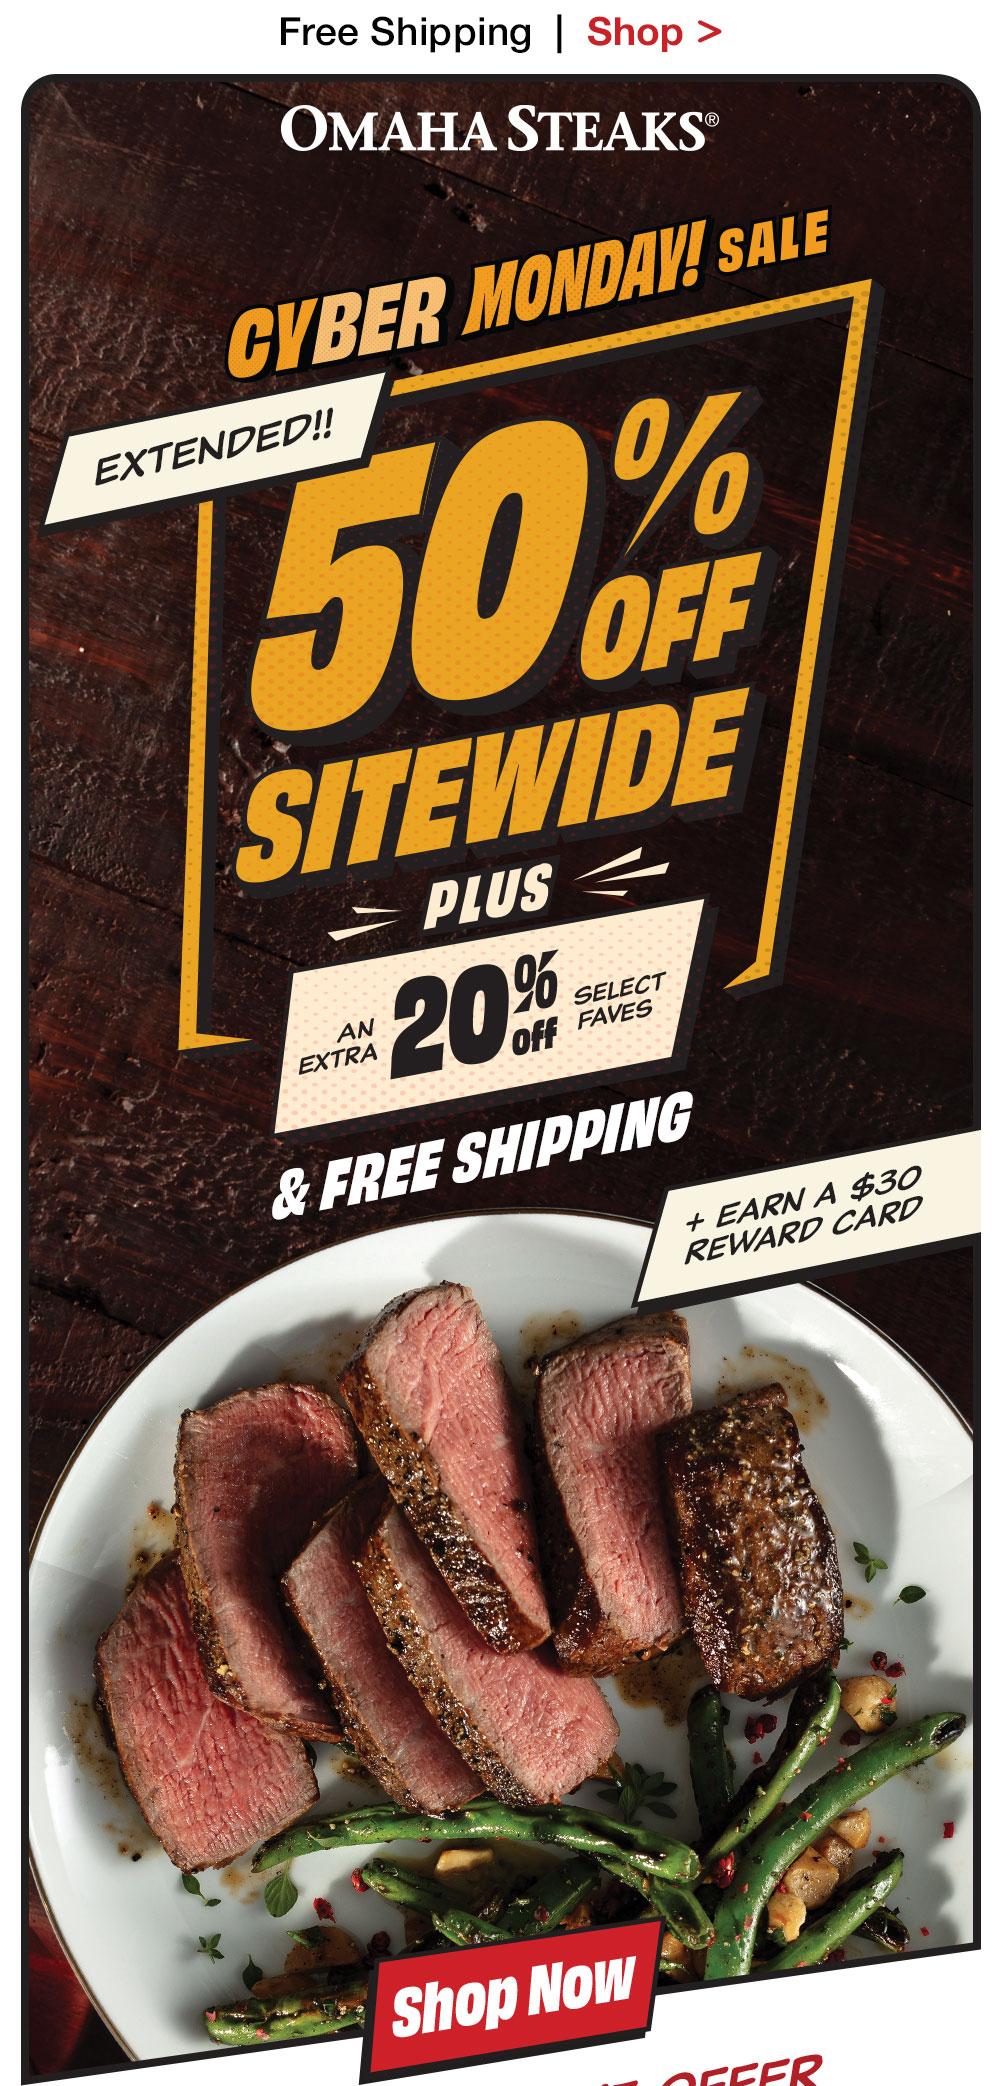 Free Shipping | Shop > OMAHA STEAKS®  CYBER MONDAY! SALE 50% SITEWIDE - PLUS AN EXTRA 20% SELECT FAVES & FREE SHIPPING + EARN A $30 REWARD CARD || Shop Now